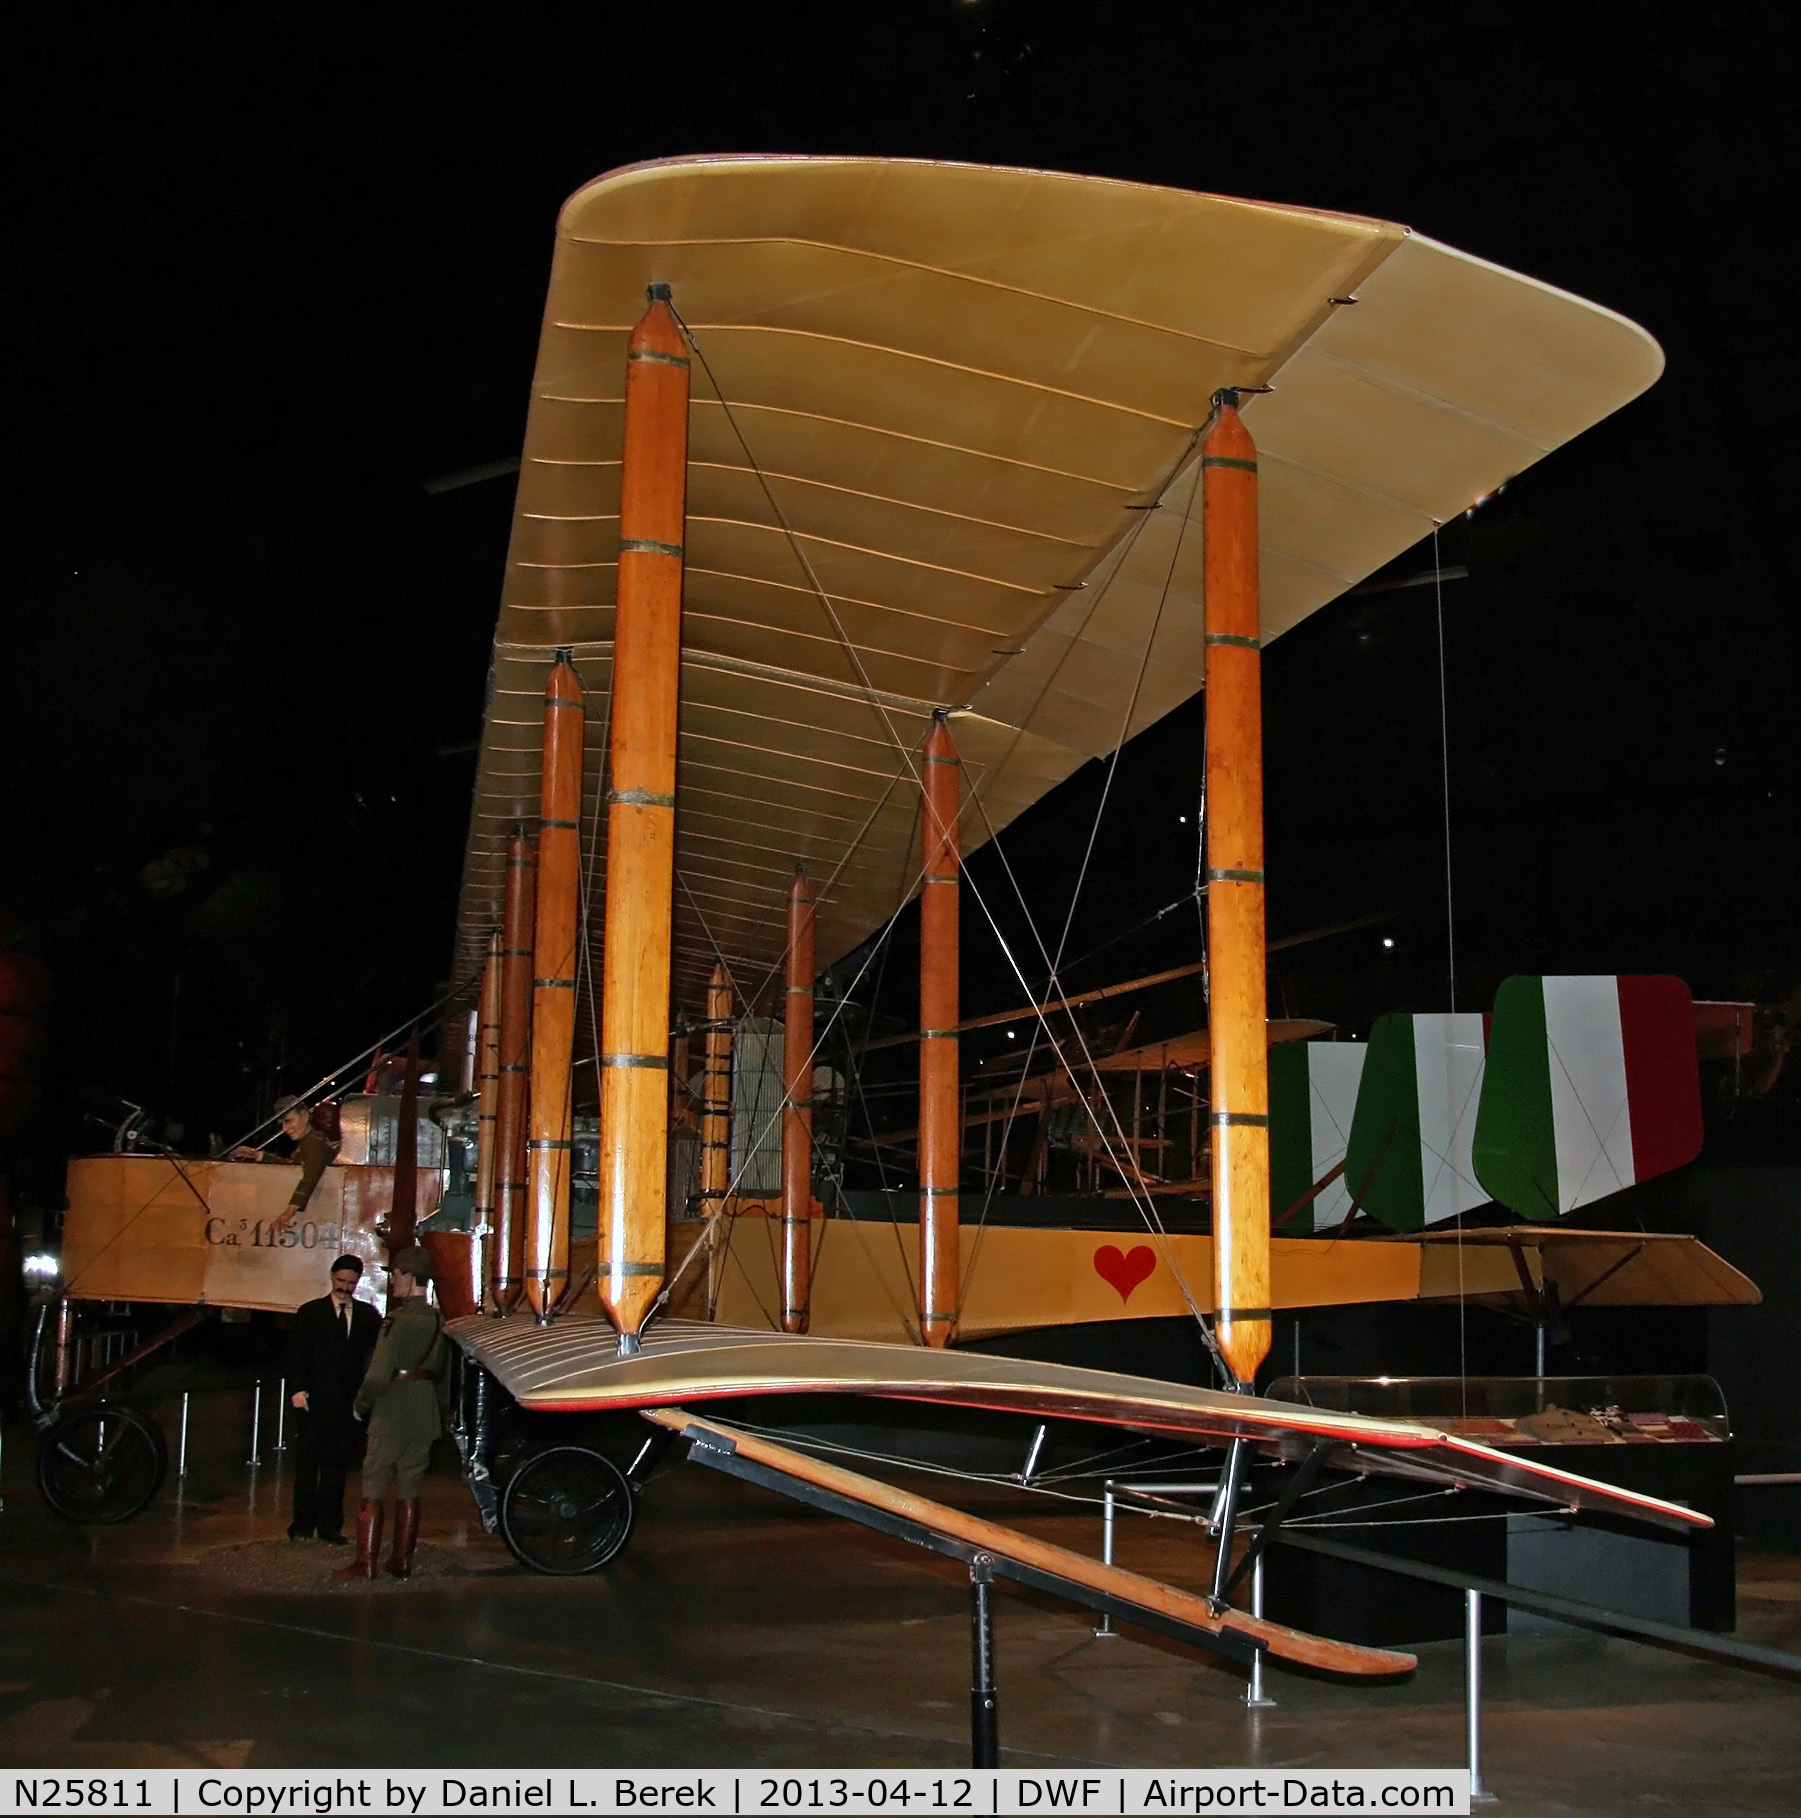 N25811, Caproni Ca.36M C/N 3808, This World War I Italian bomber is on display at the National Museum of the US Air Force, Dayton, OH.